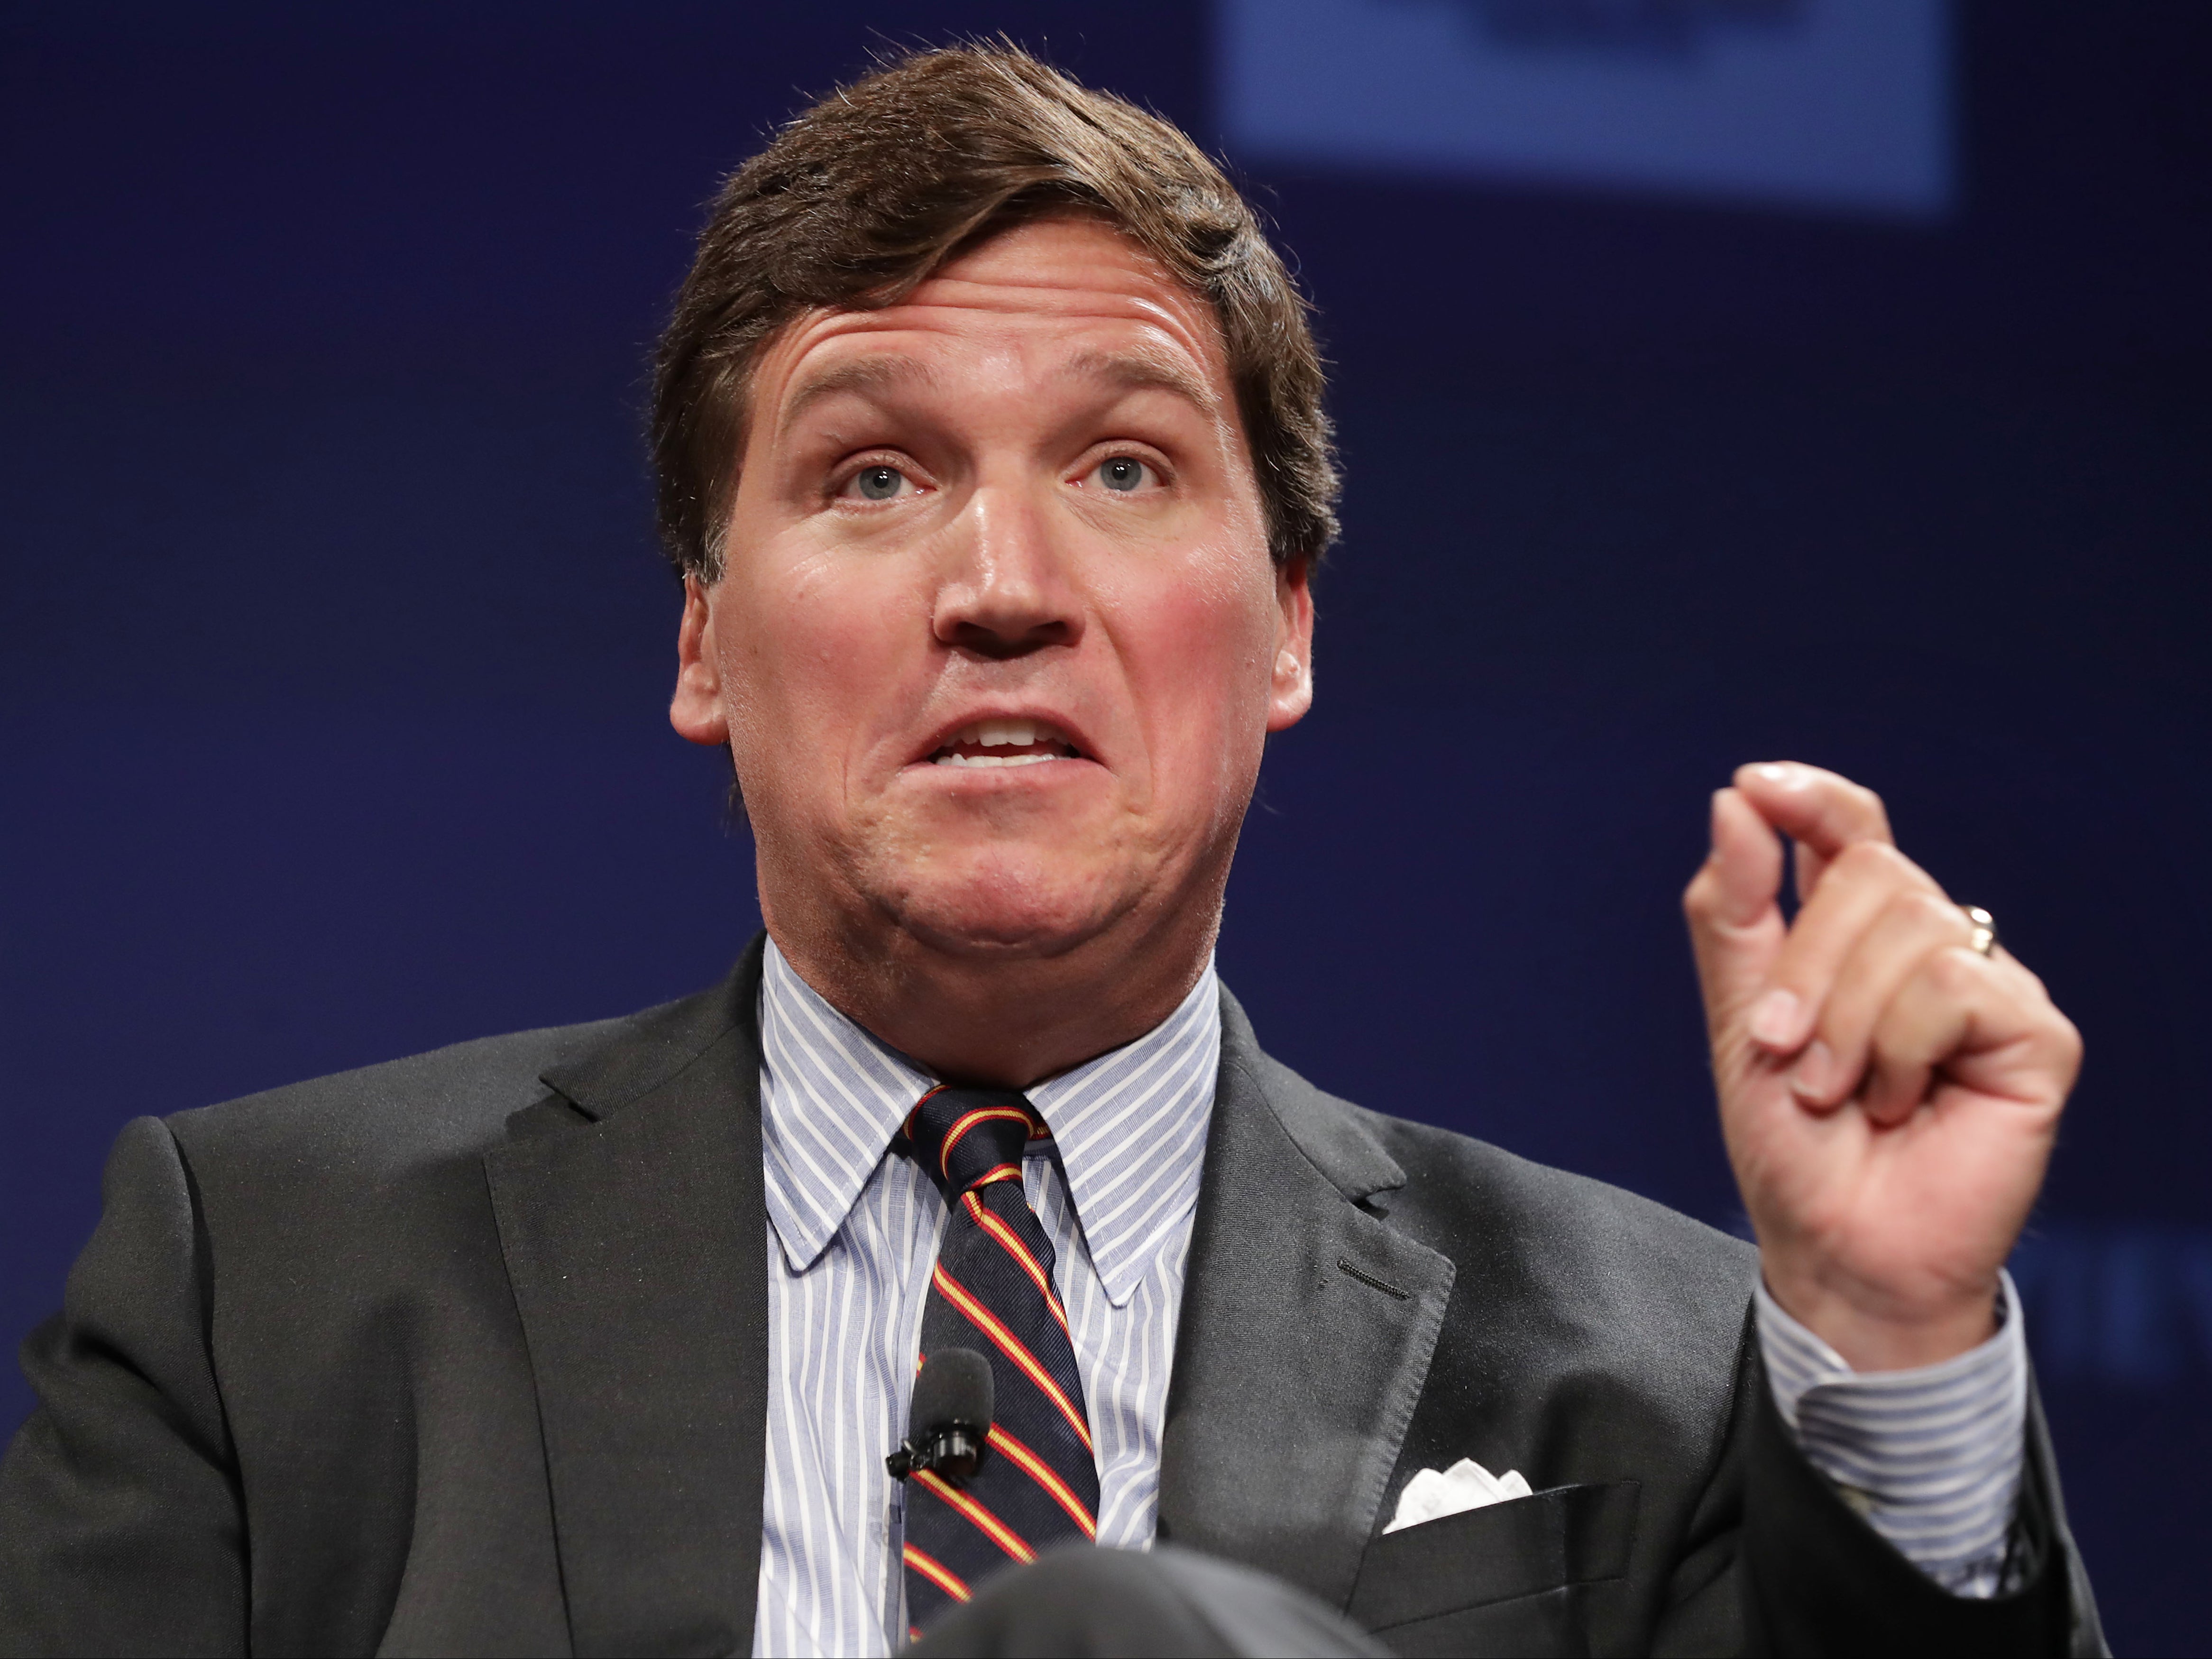 Tucker Carlson has been lambasted for his comments.